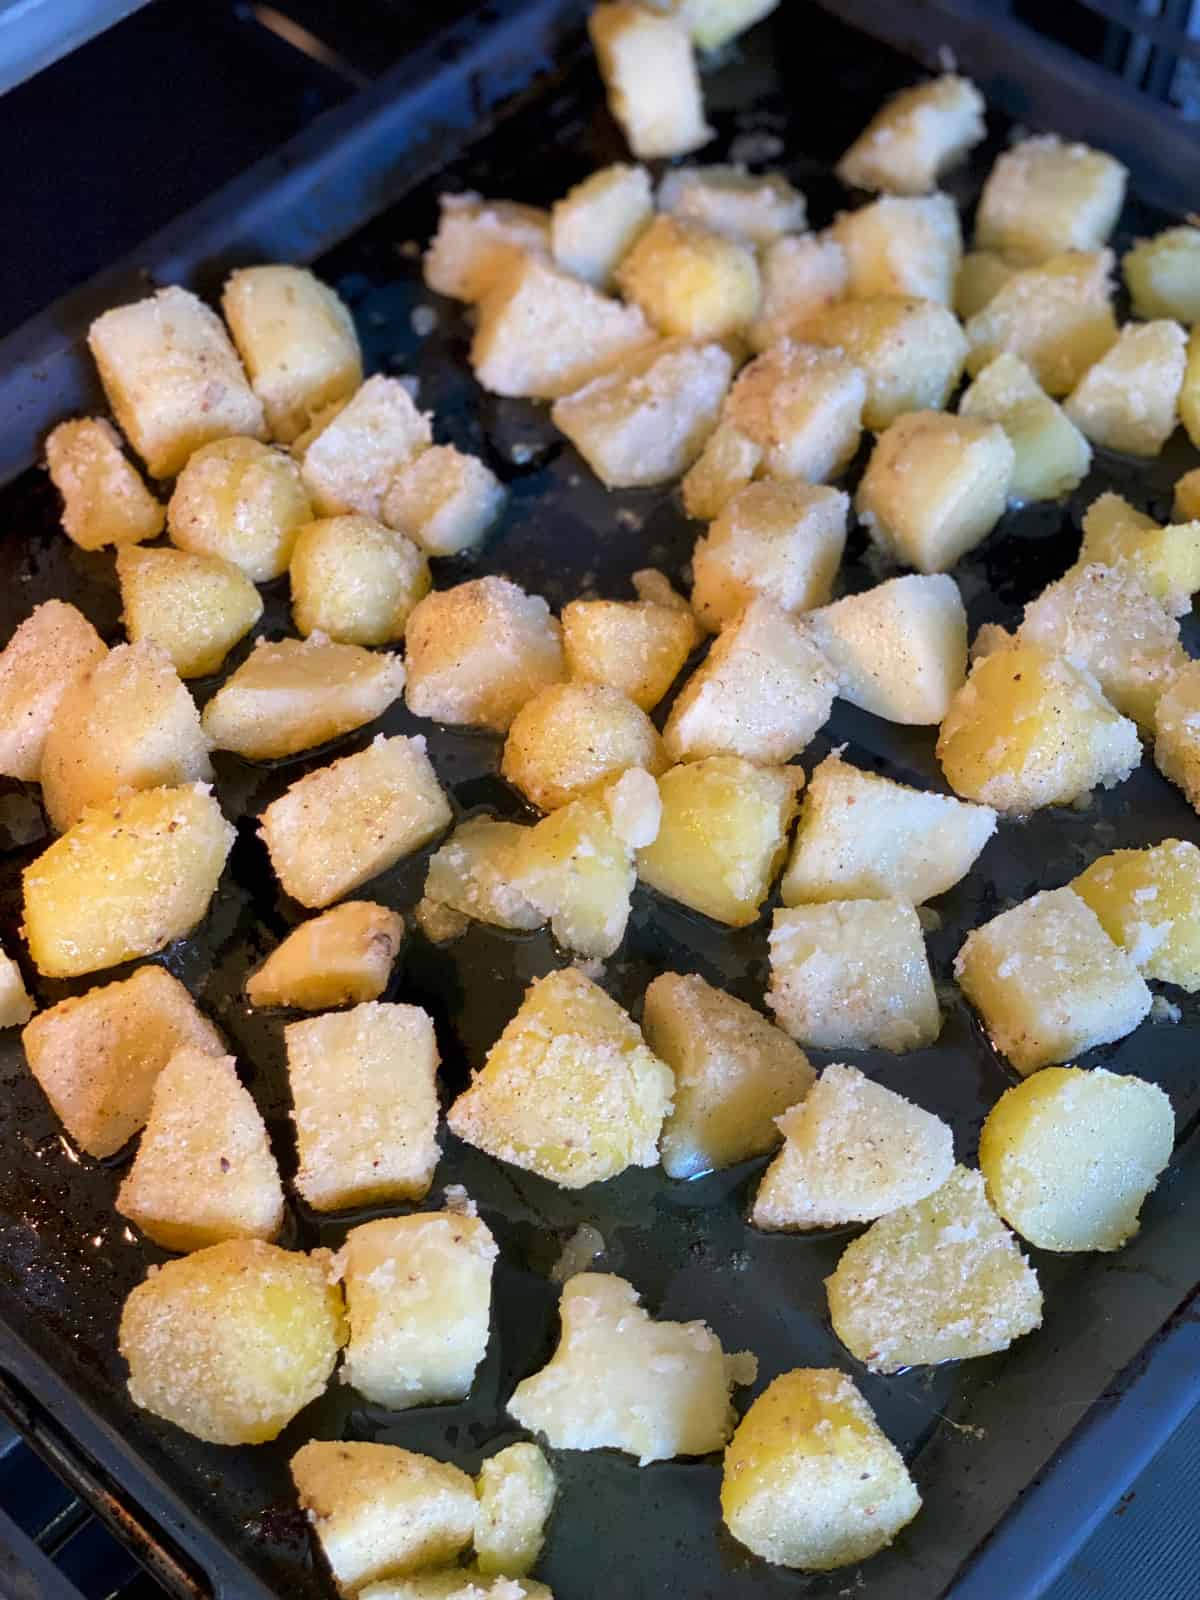 Potato pieces coated in a parmesan semolina in a roasting pan in the oven.